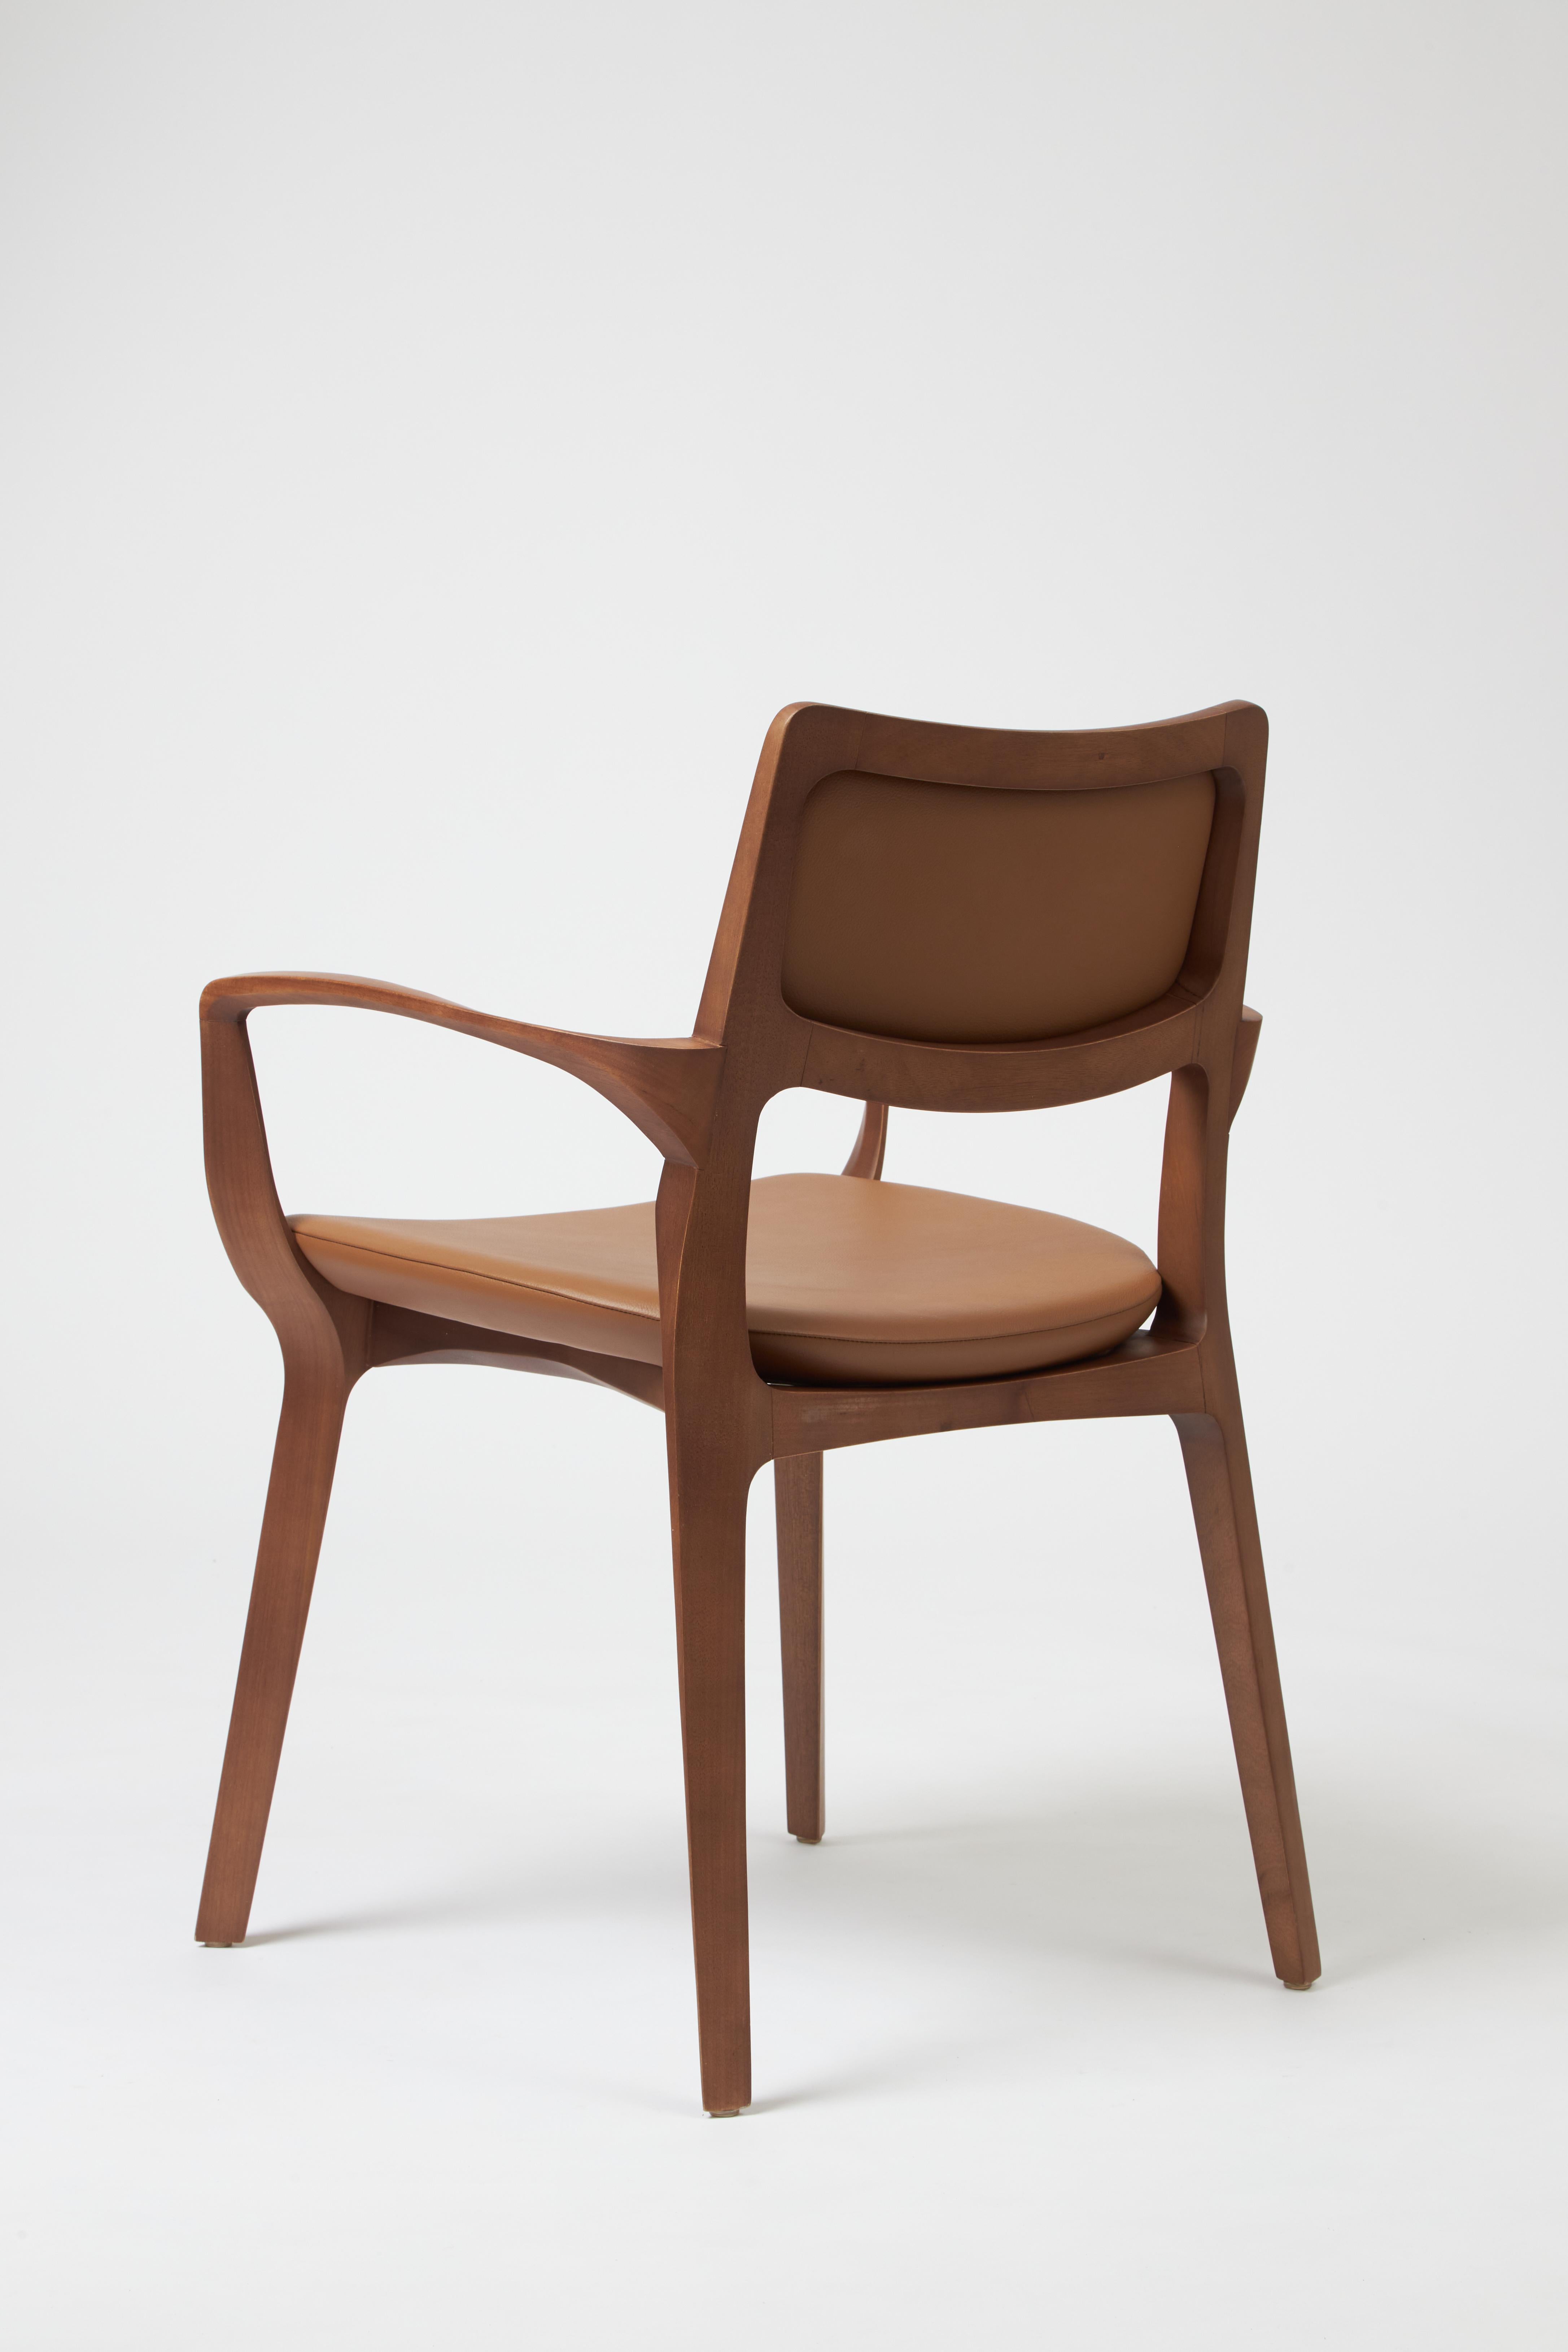 Post-Modern Modern Style Aurora Chair Sculpted in Walnut Finish Arms, leather back & seating For Sale